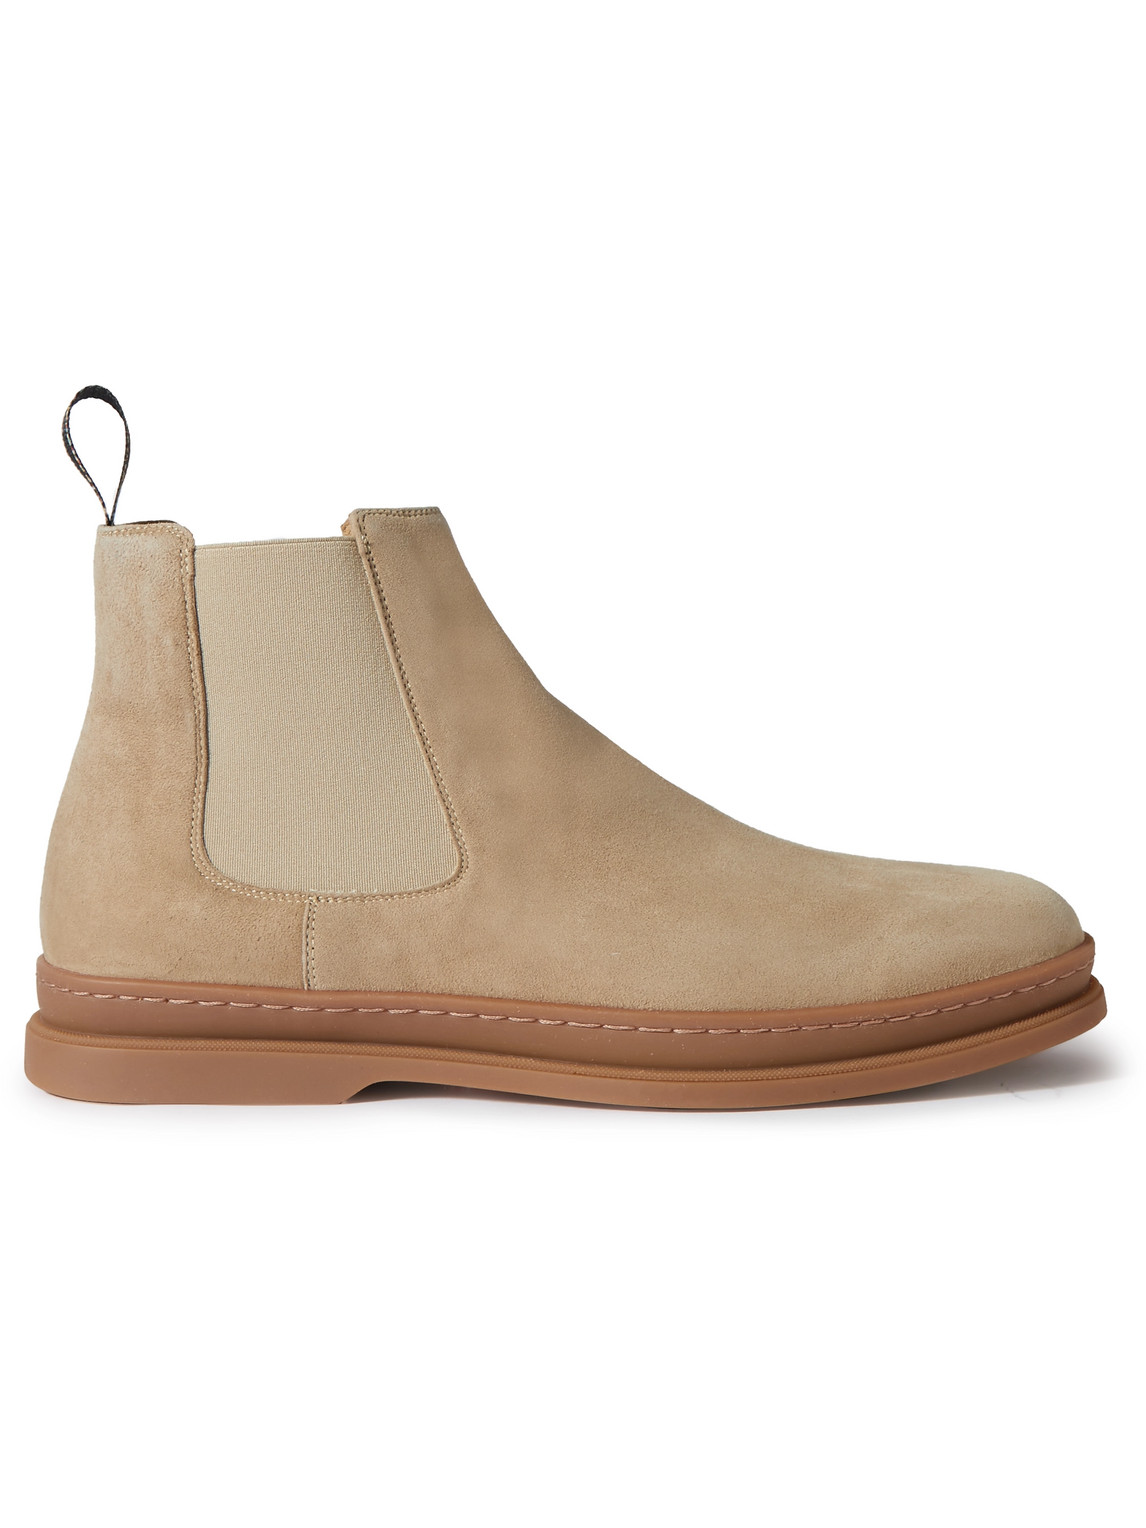 PAUL SMITH UGO SUEDE CHELSEA BOOTS